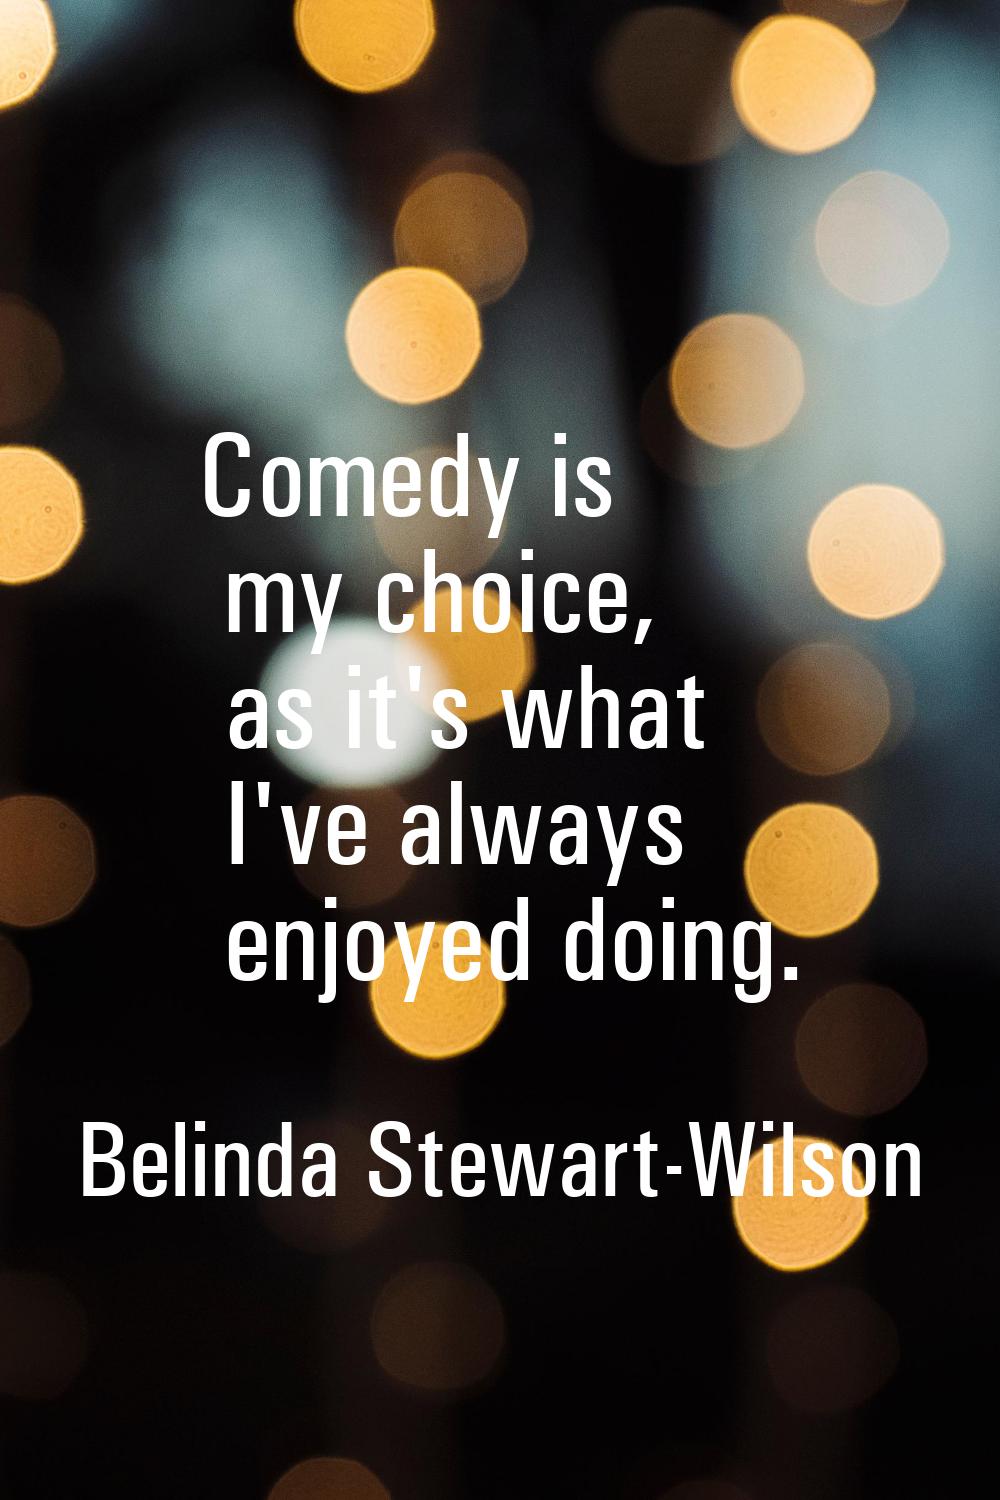 Comedy is my choice, as it's what I've always enjoyed doing.